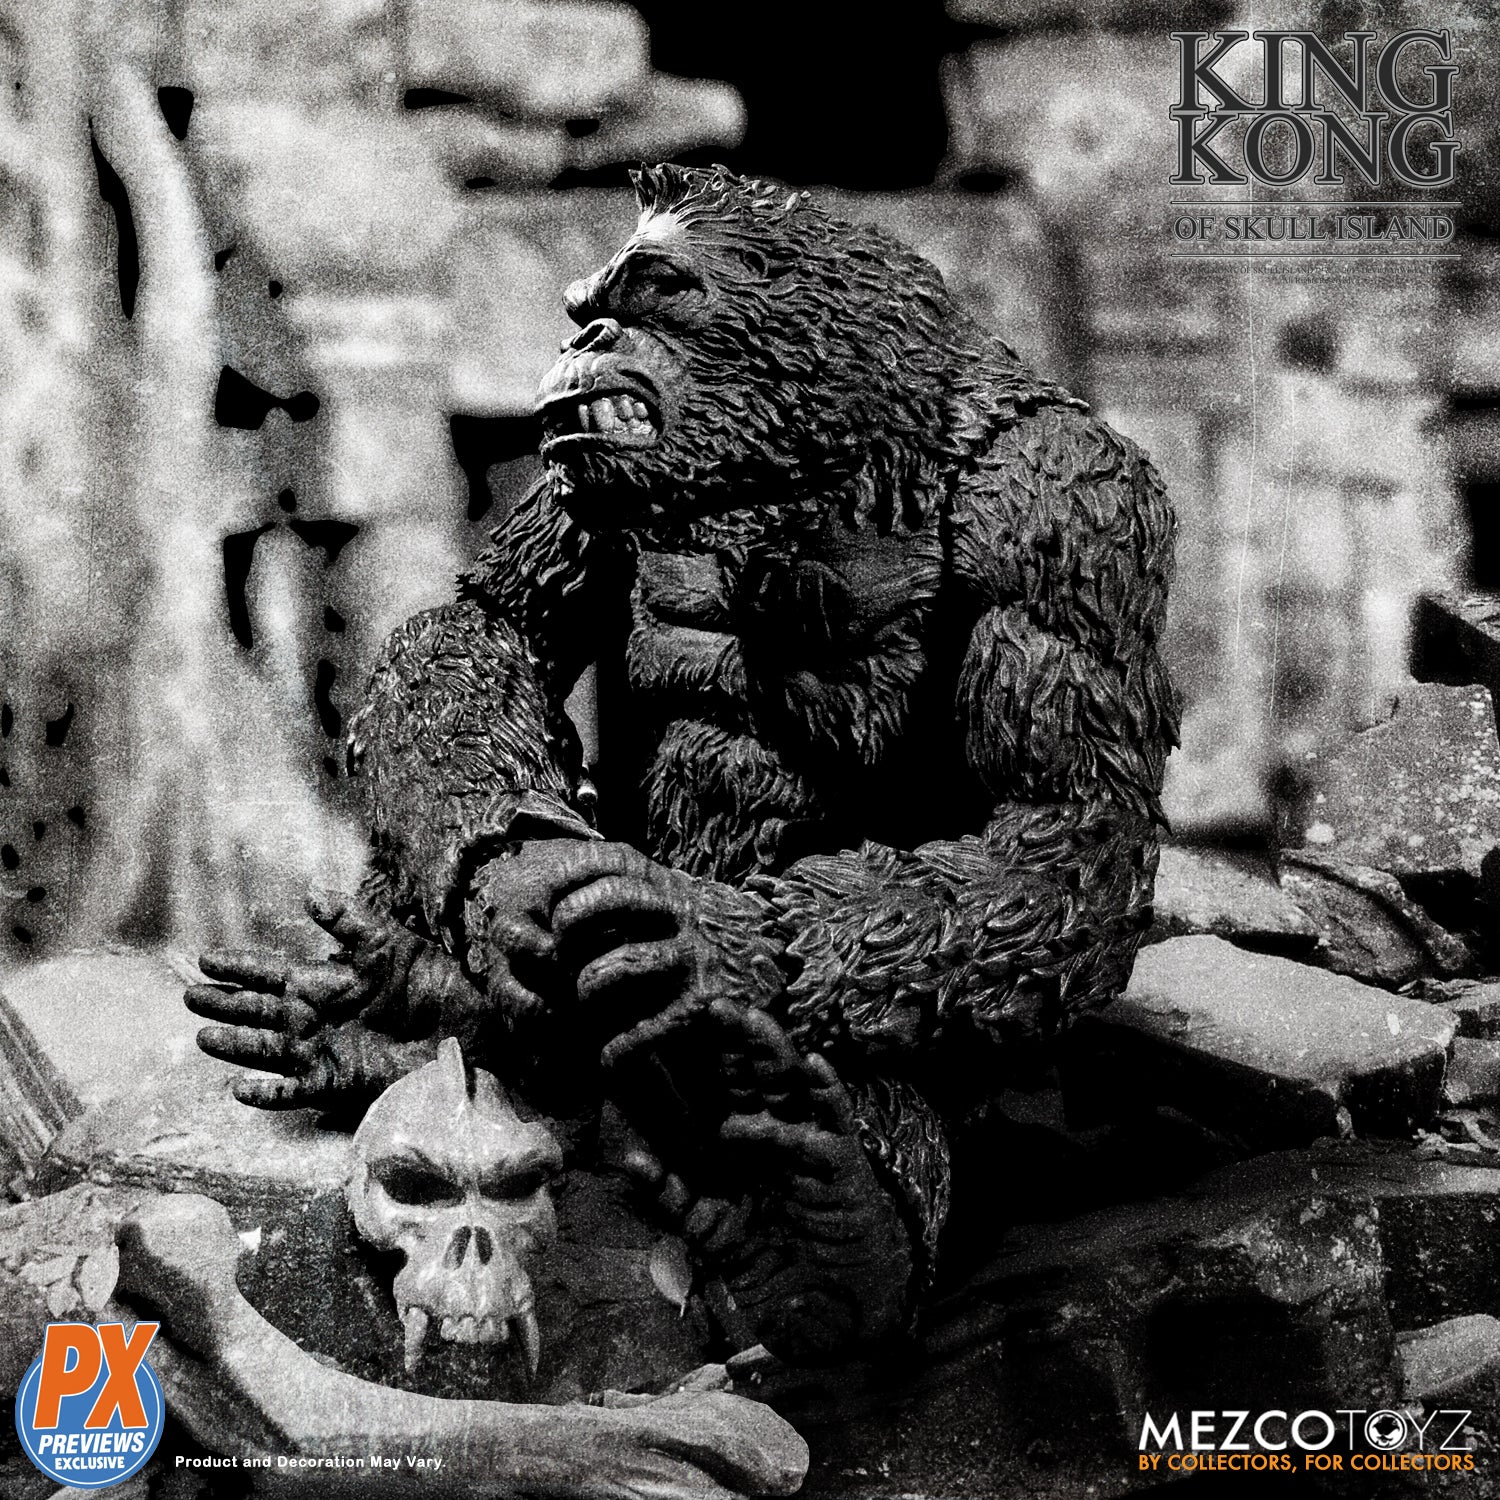 Mezco - King Kong of Skull Island B&amp;W Version (Previews Exclusive) - Marvelous Toys